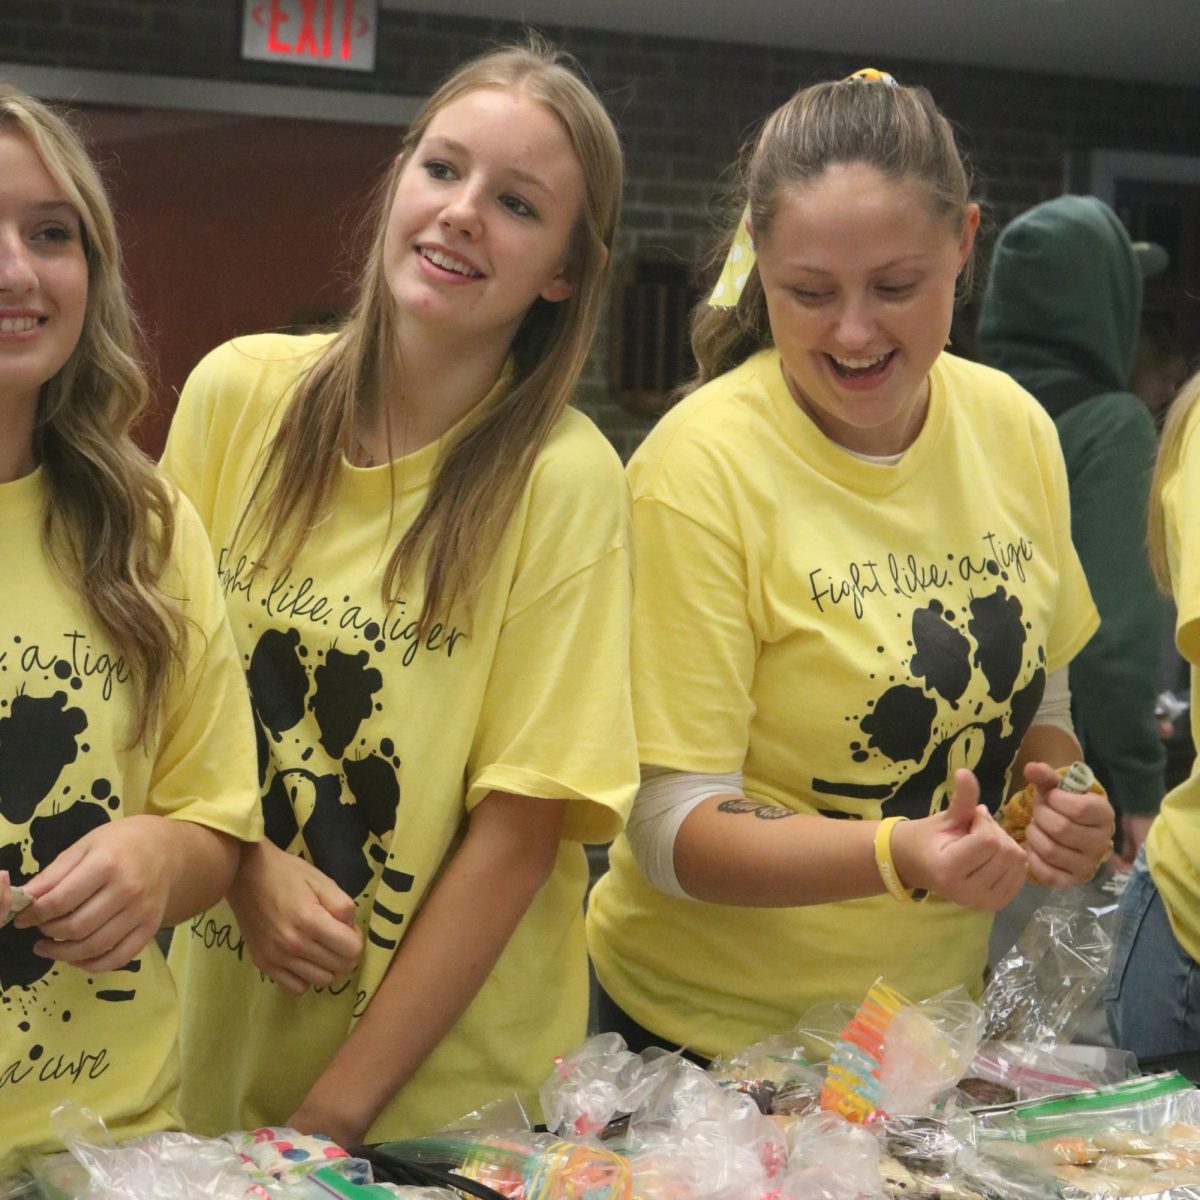 The varsity volleyball team at their bake sale to help fight childhood cancer. Senior Makenzie Lawson and sophomore Marley Pihlstrom are seen happily helping out their team.